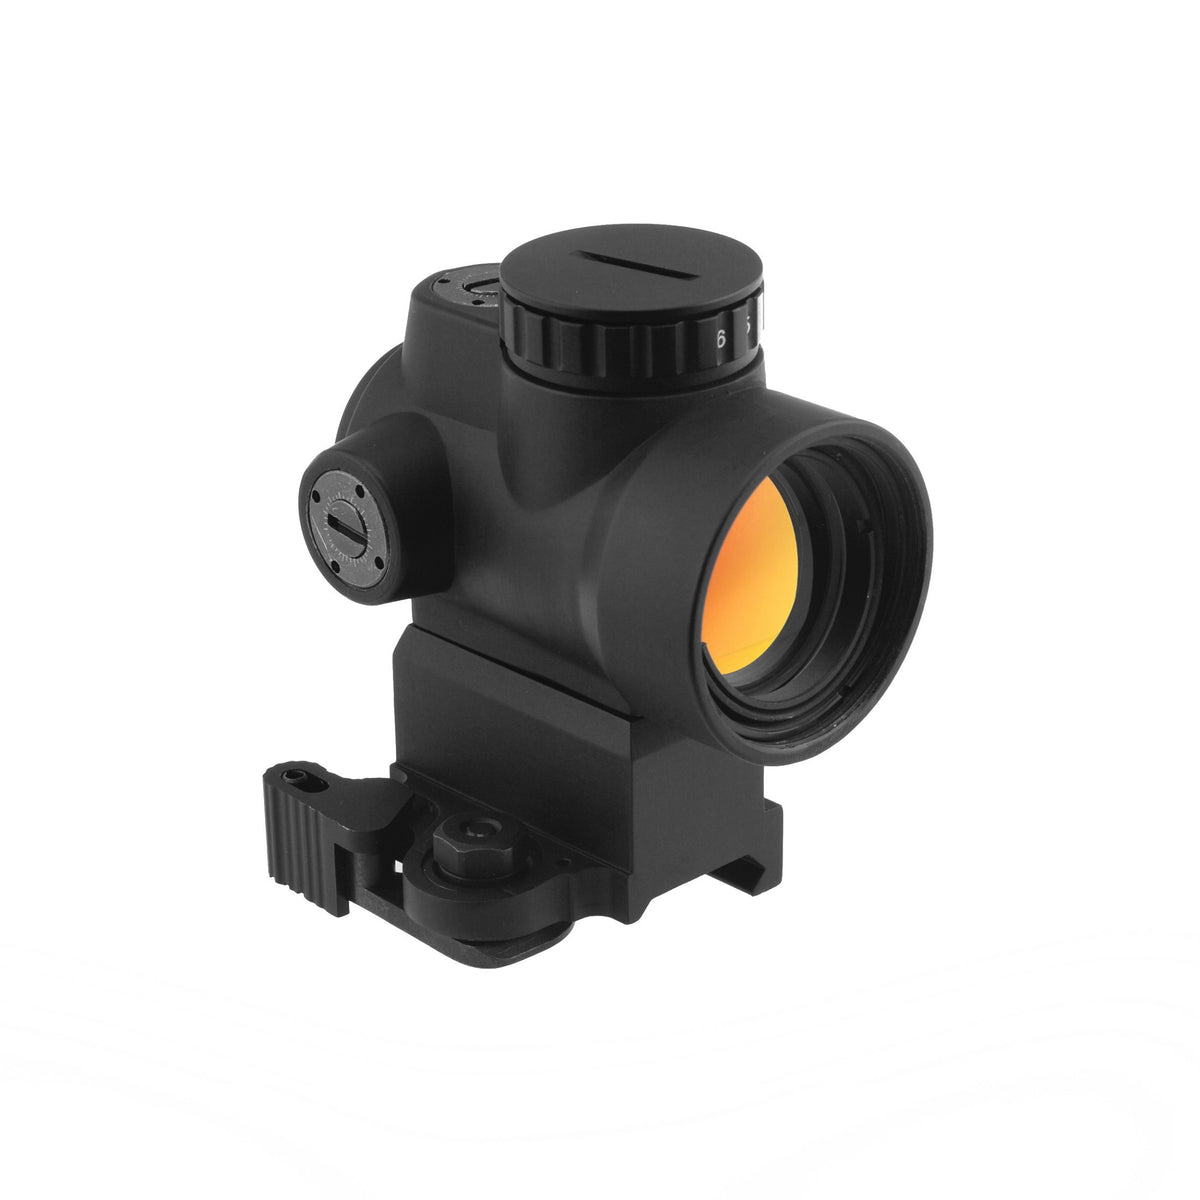 MRO Red Dot Sight Pack with Killflash